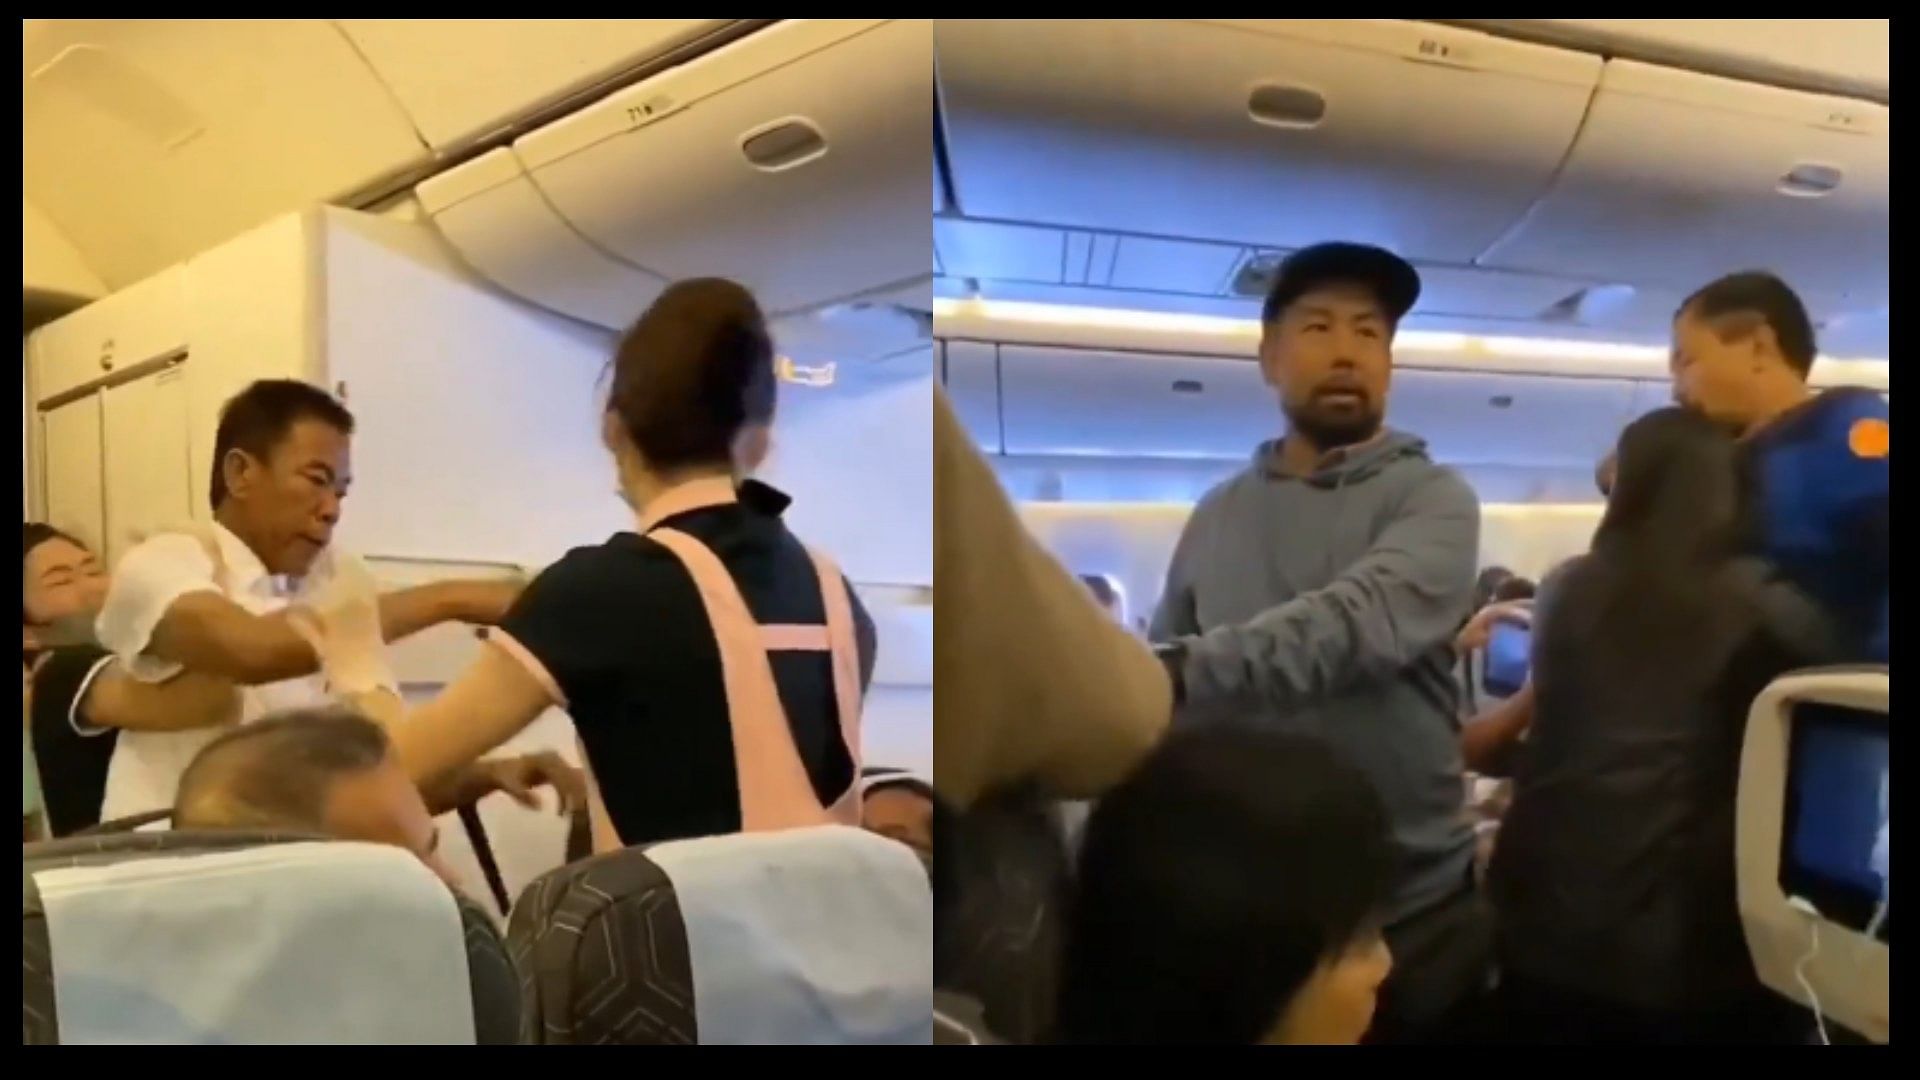 Punch Fight between two passengers over seat in flight video viral on social media